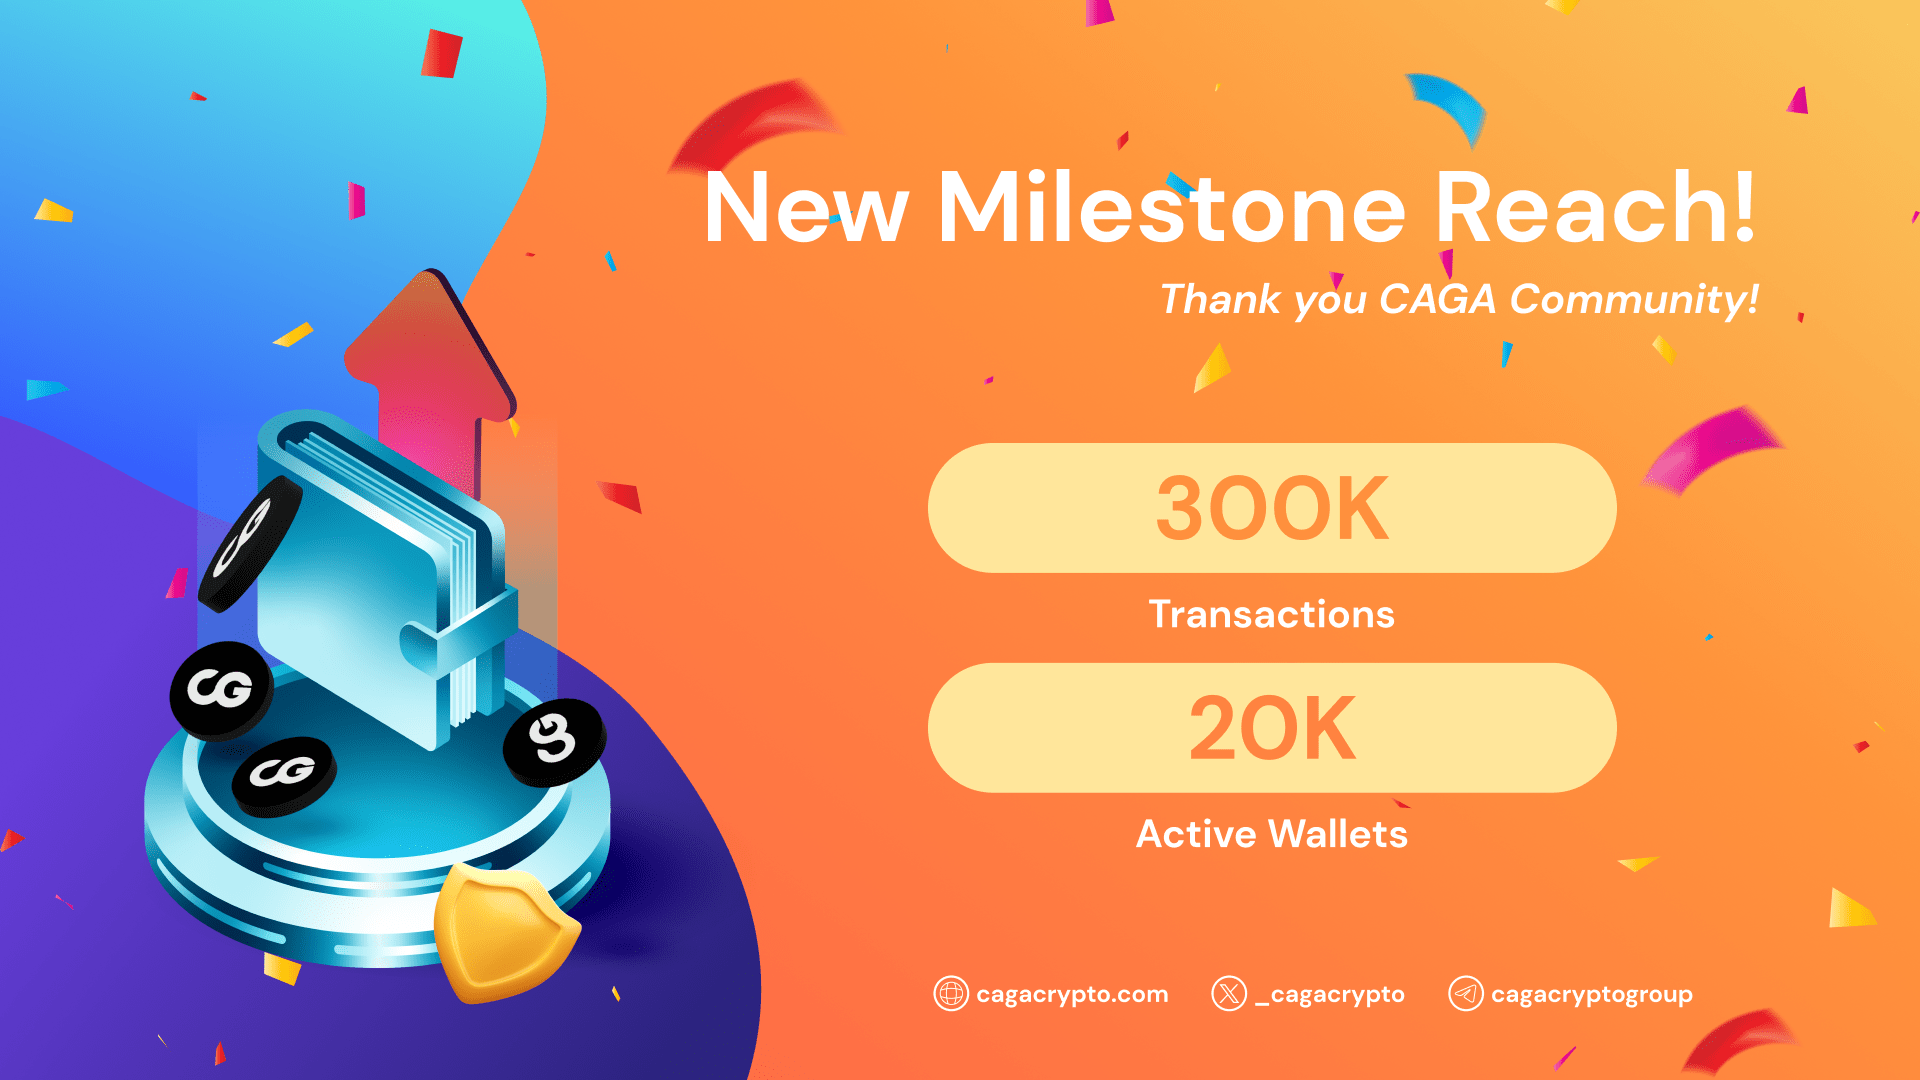 Cover Image for $CAGA Network: Celebrating 20,000 Active Wallets and 300k Transactions!